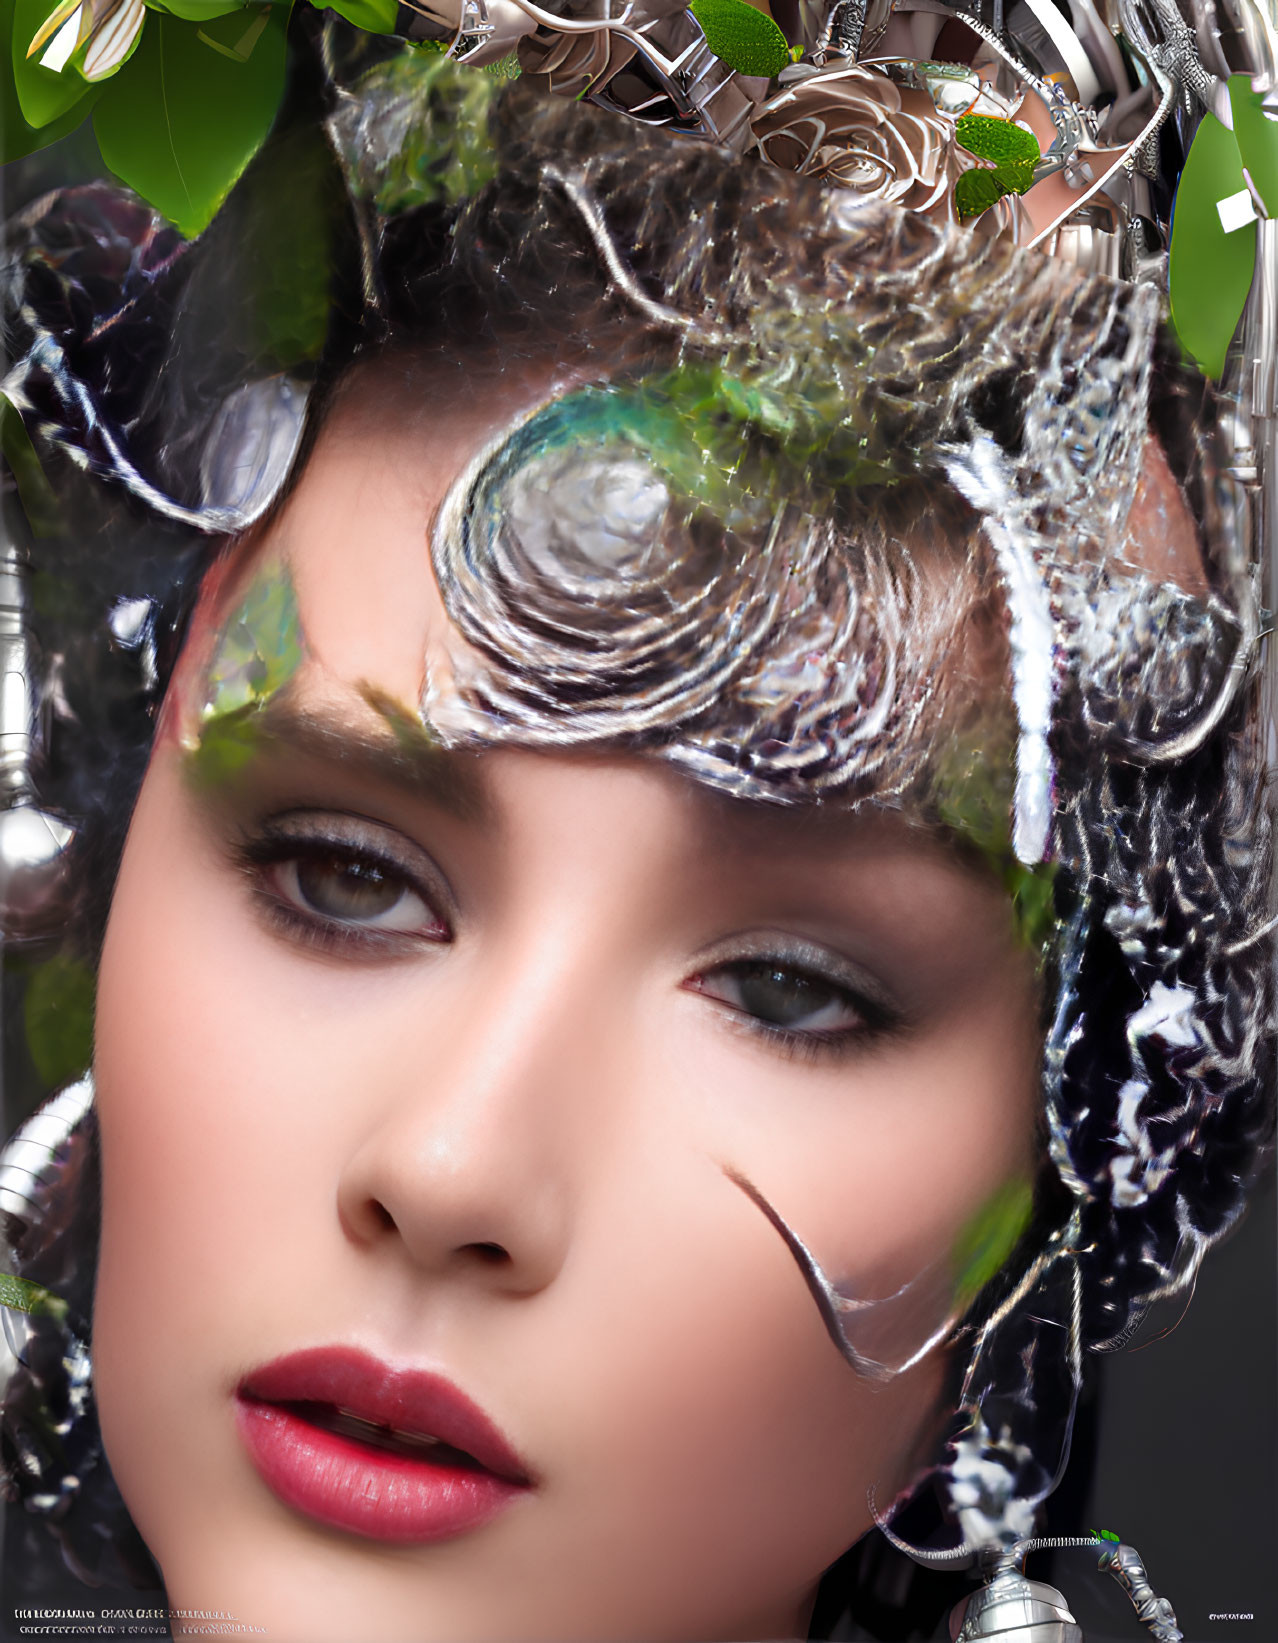 Detailed Close-Up of Woman with Artistic Floral and Water Makeup